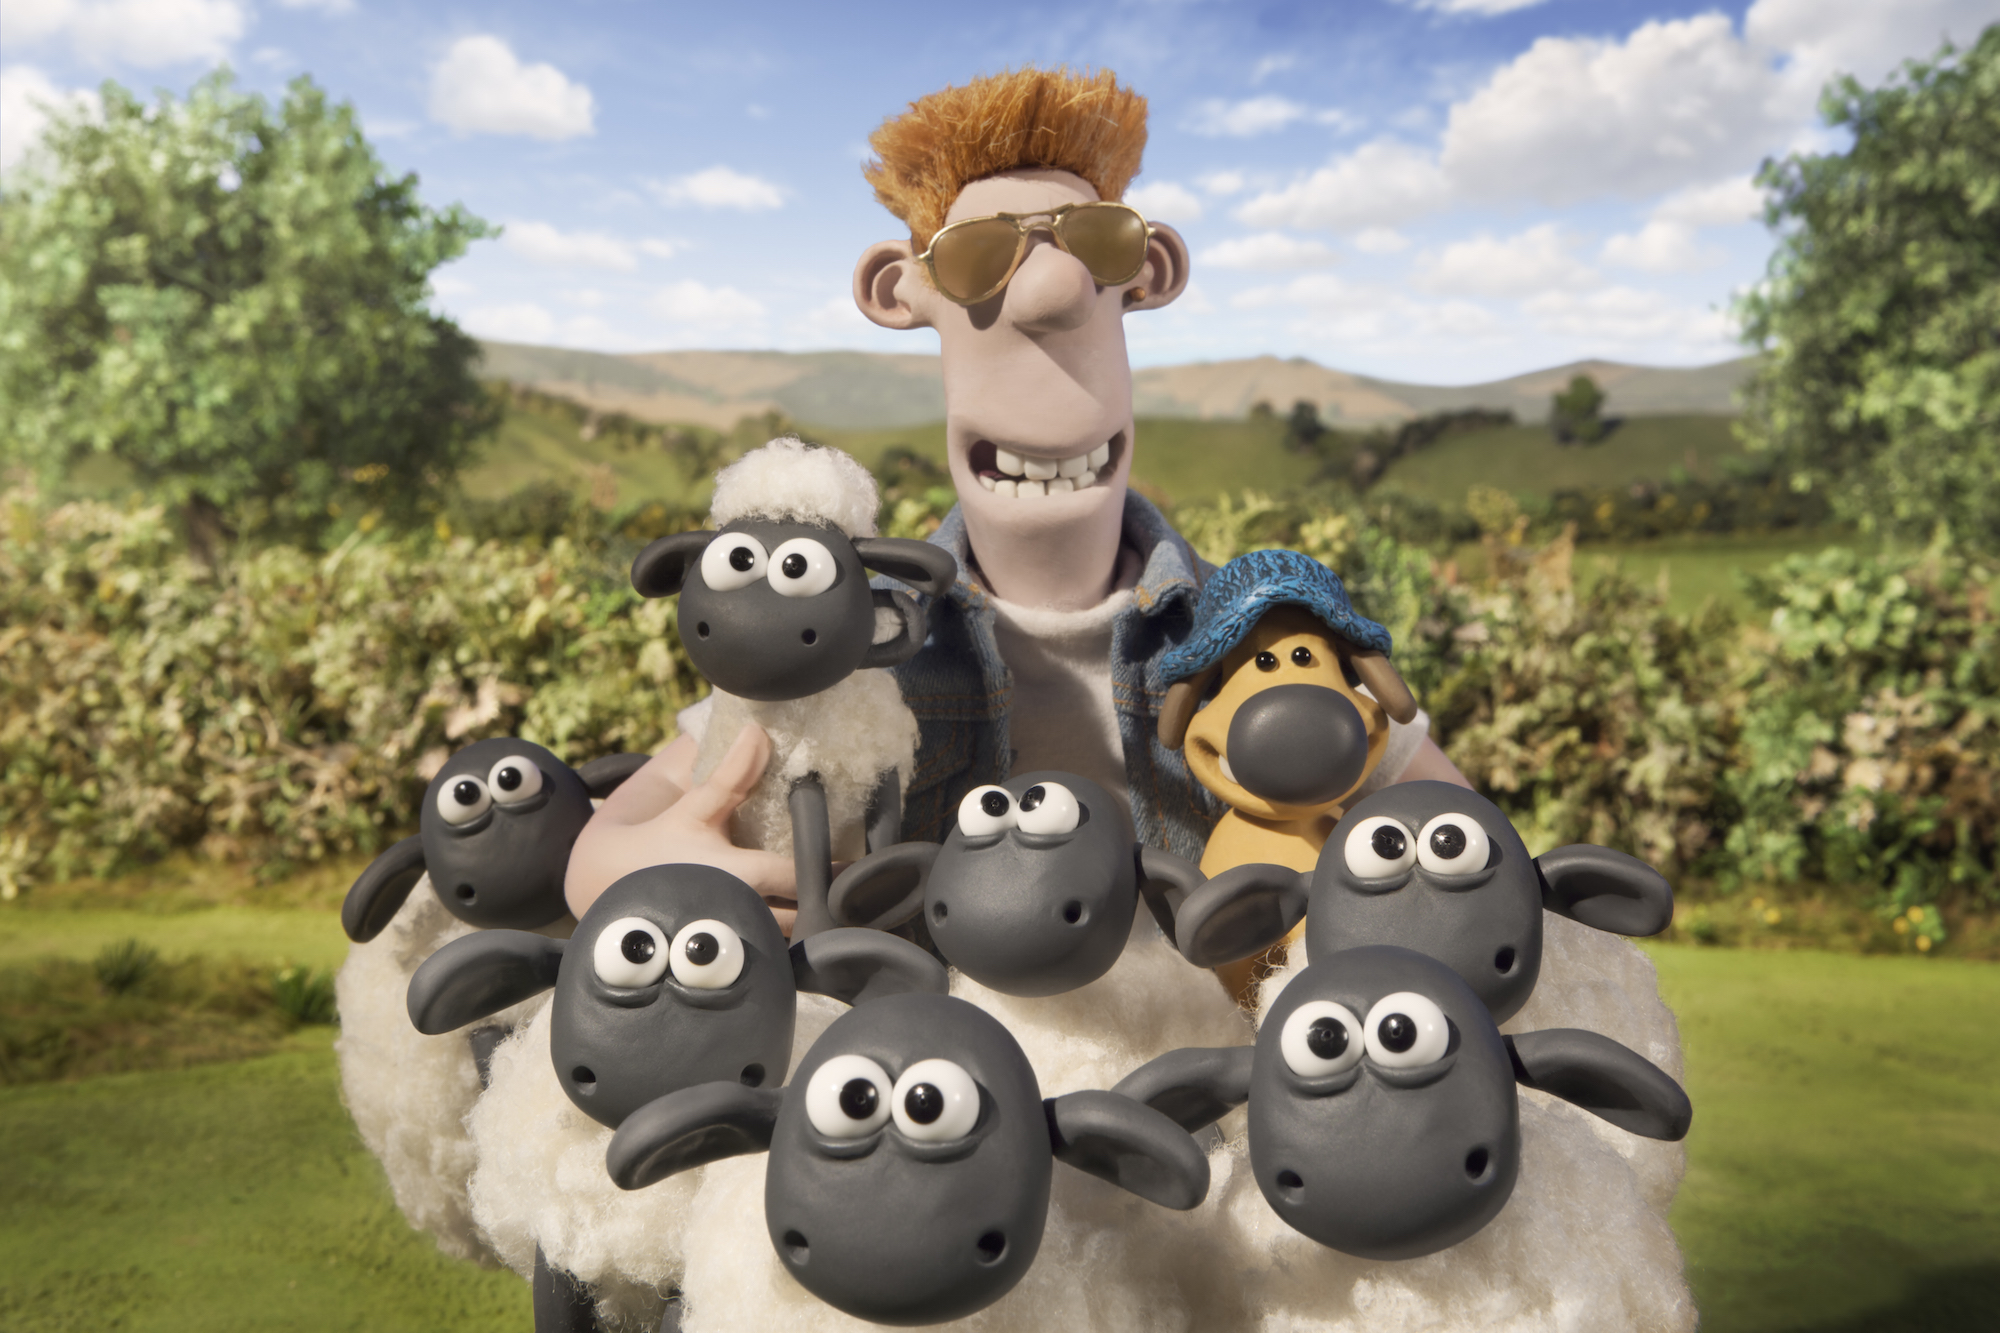 HQ Shaun The Sheep Movie Wallpapers | File 1217.35Kb